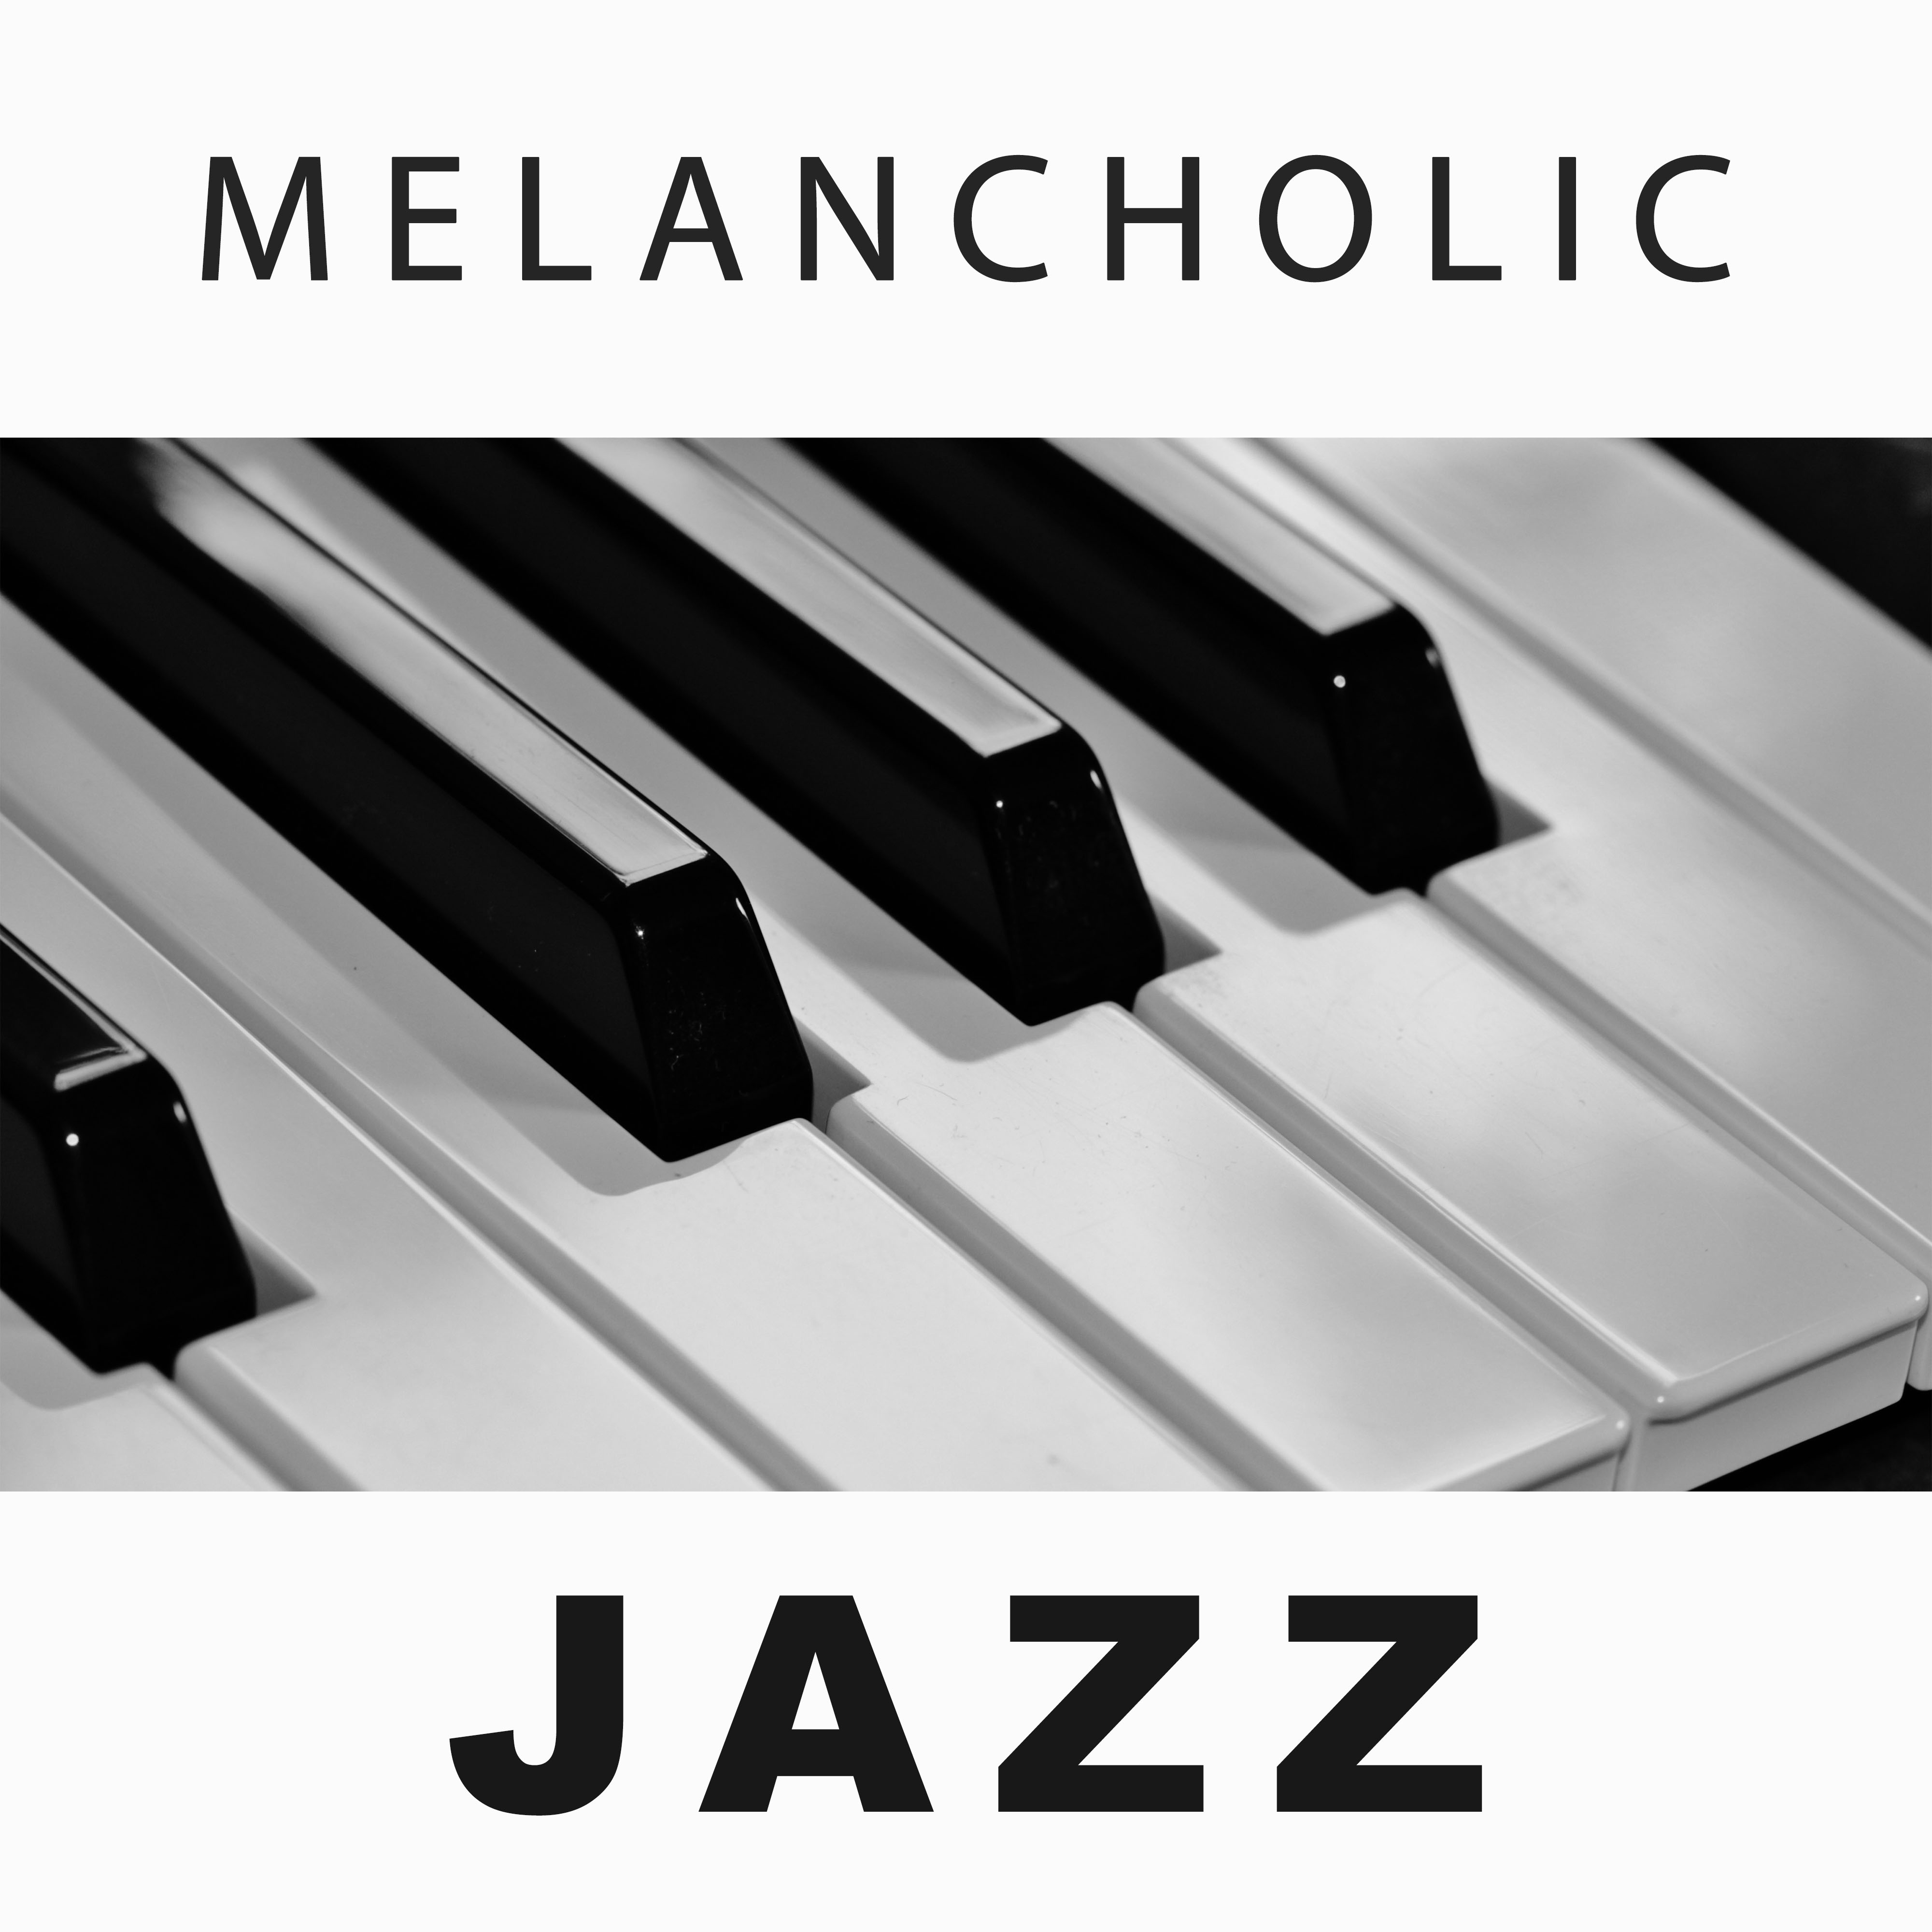 Melancholic Jazz – Ambient Piano Song, Jazz Romance, Soothing Music for Lovers